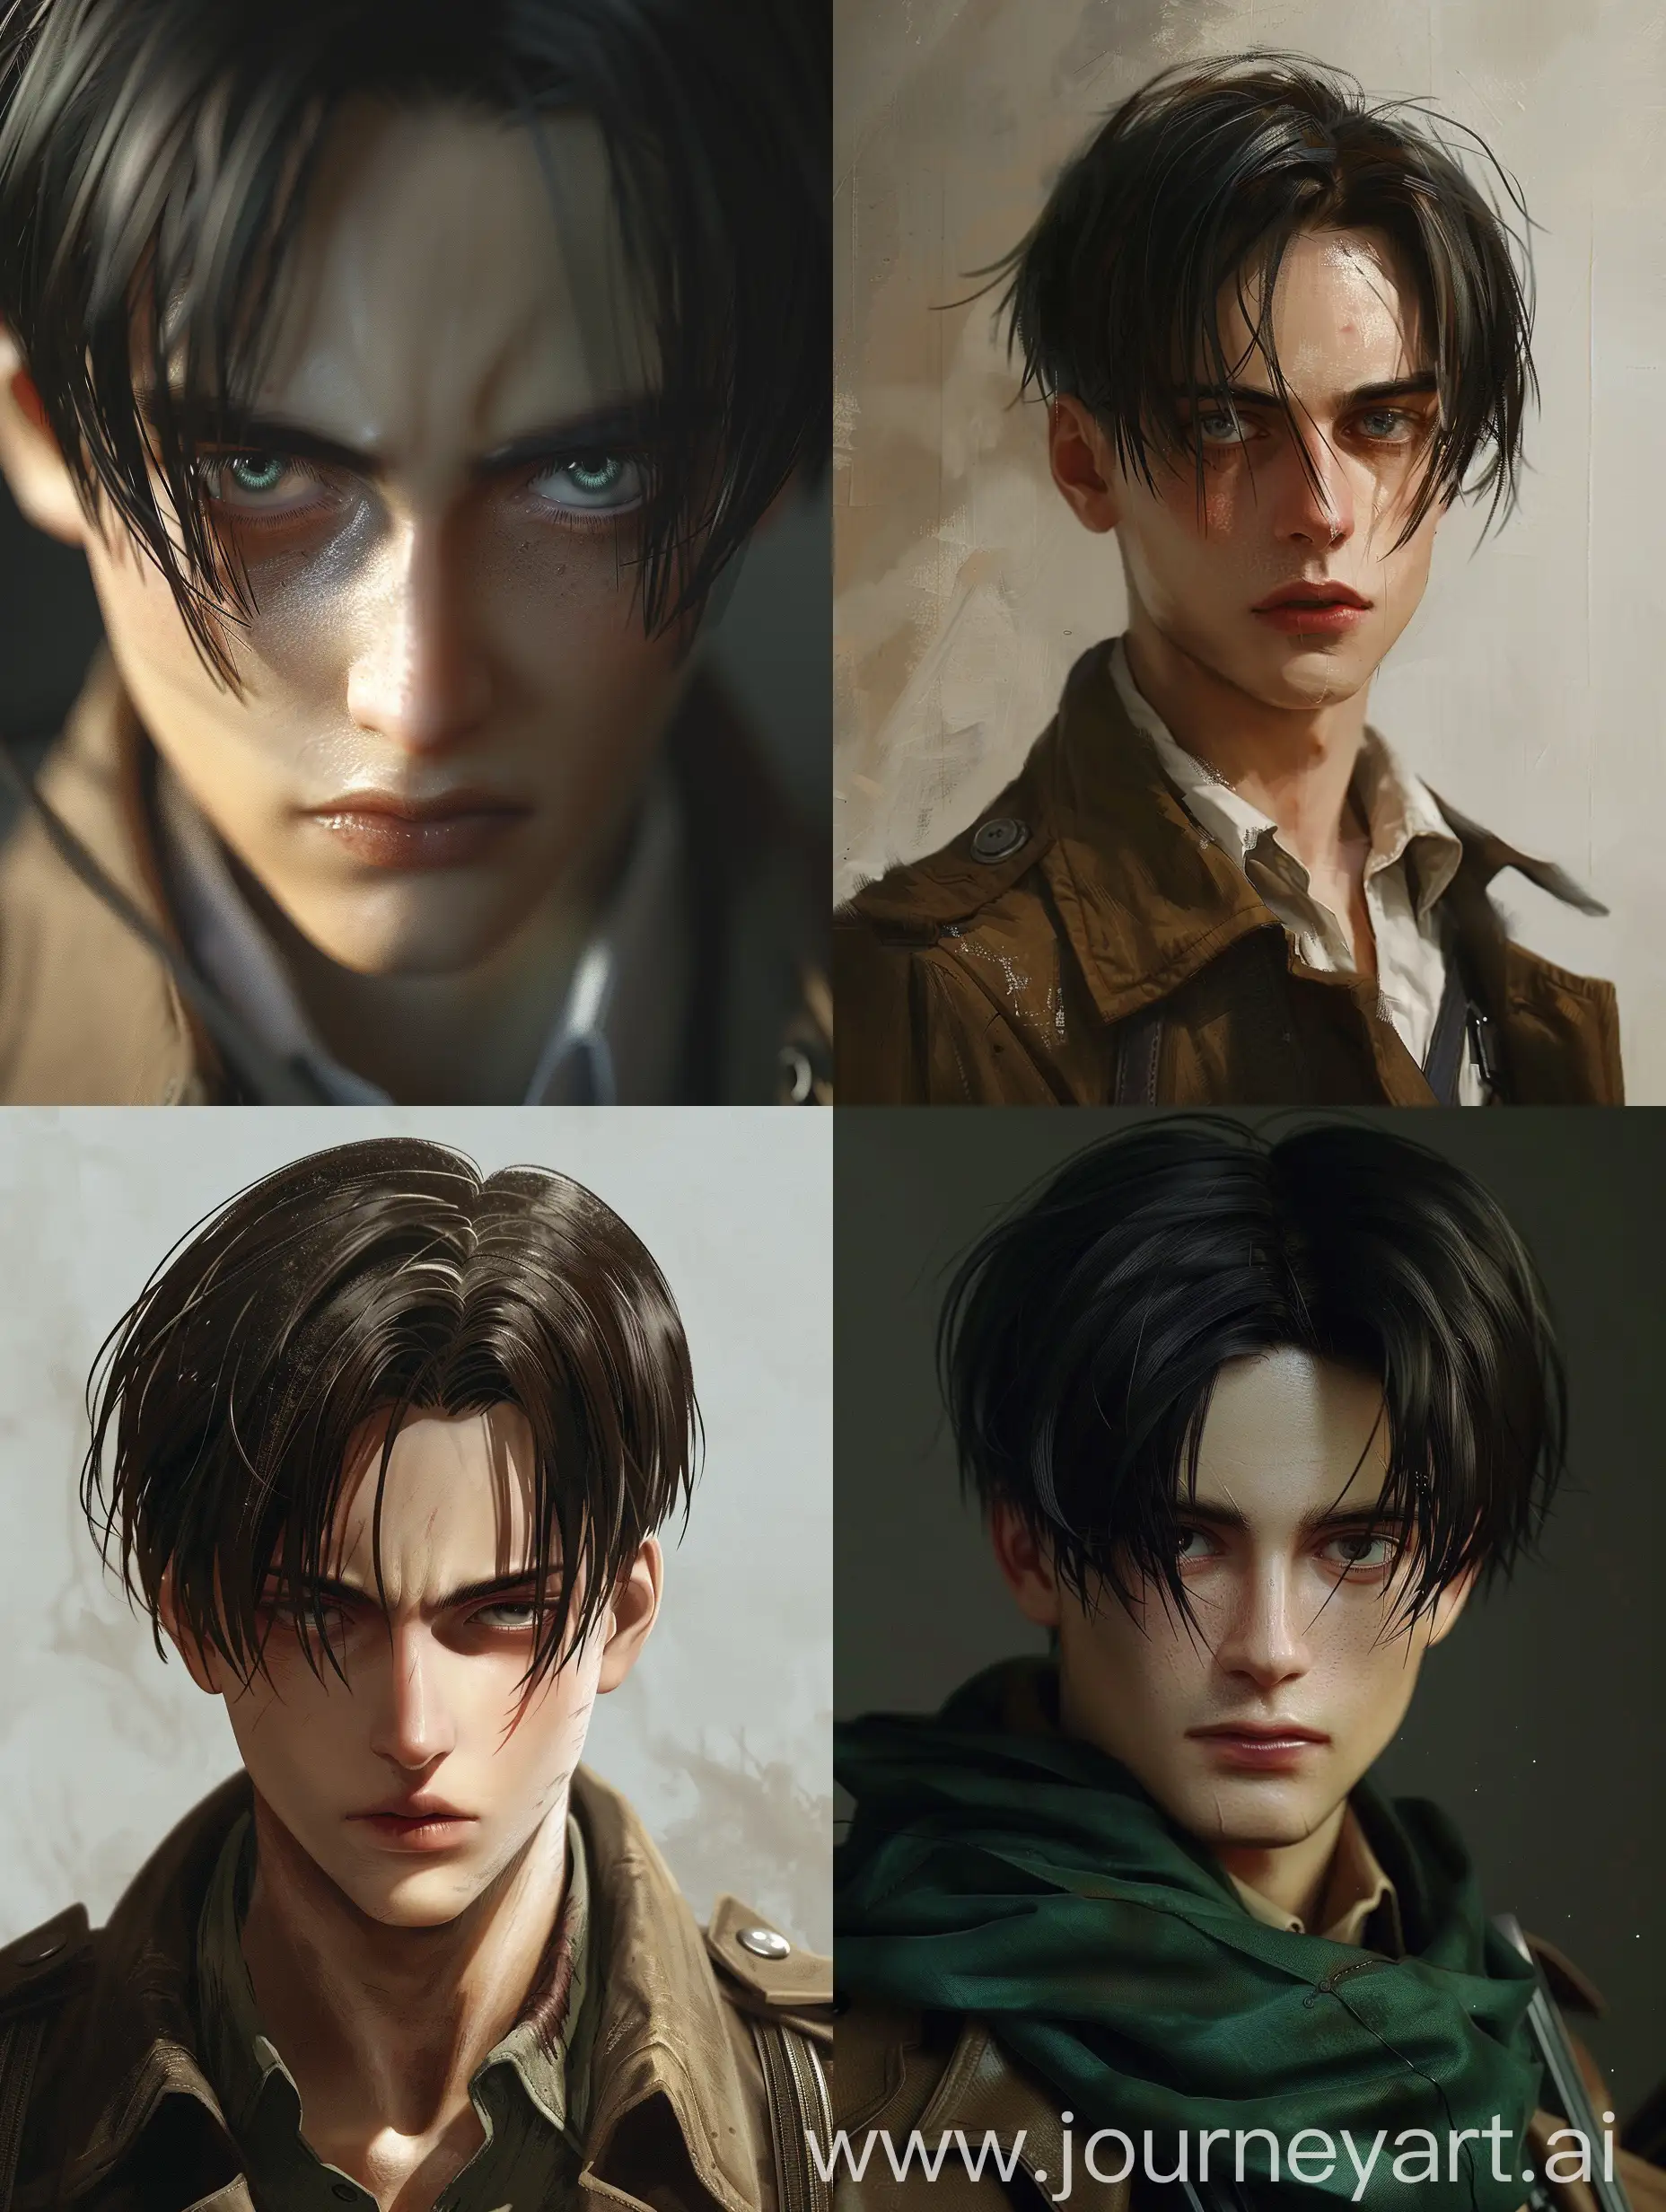 Realistic Levi Ackerman from Attack on Titan, in his 30s, with normal dark circles, slight mocking smirk